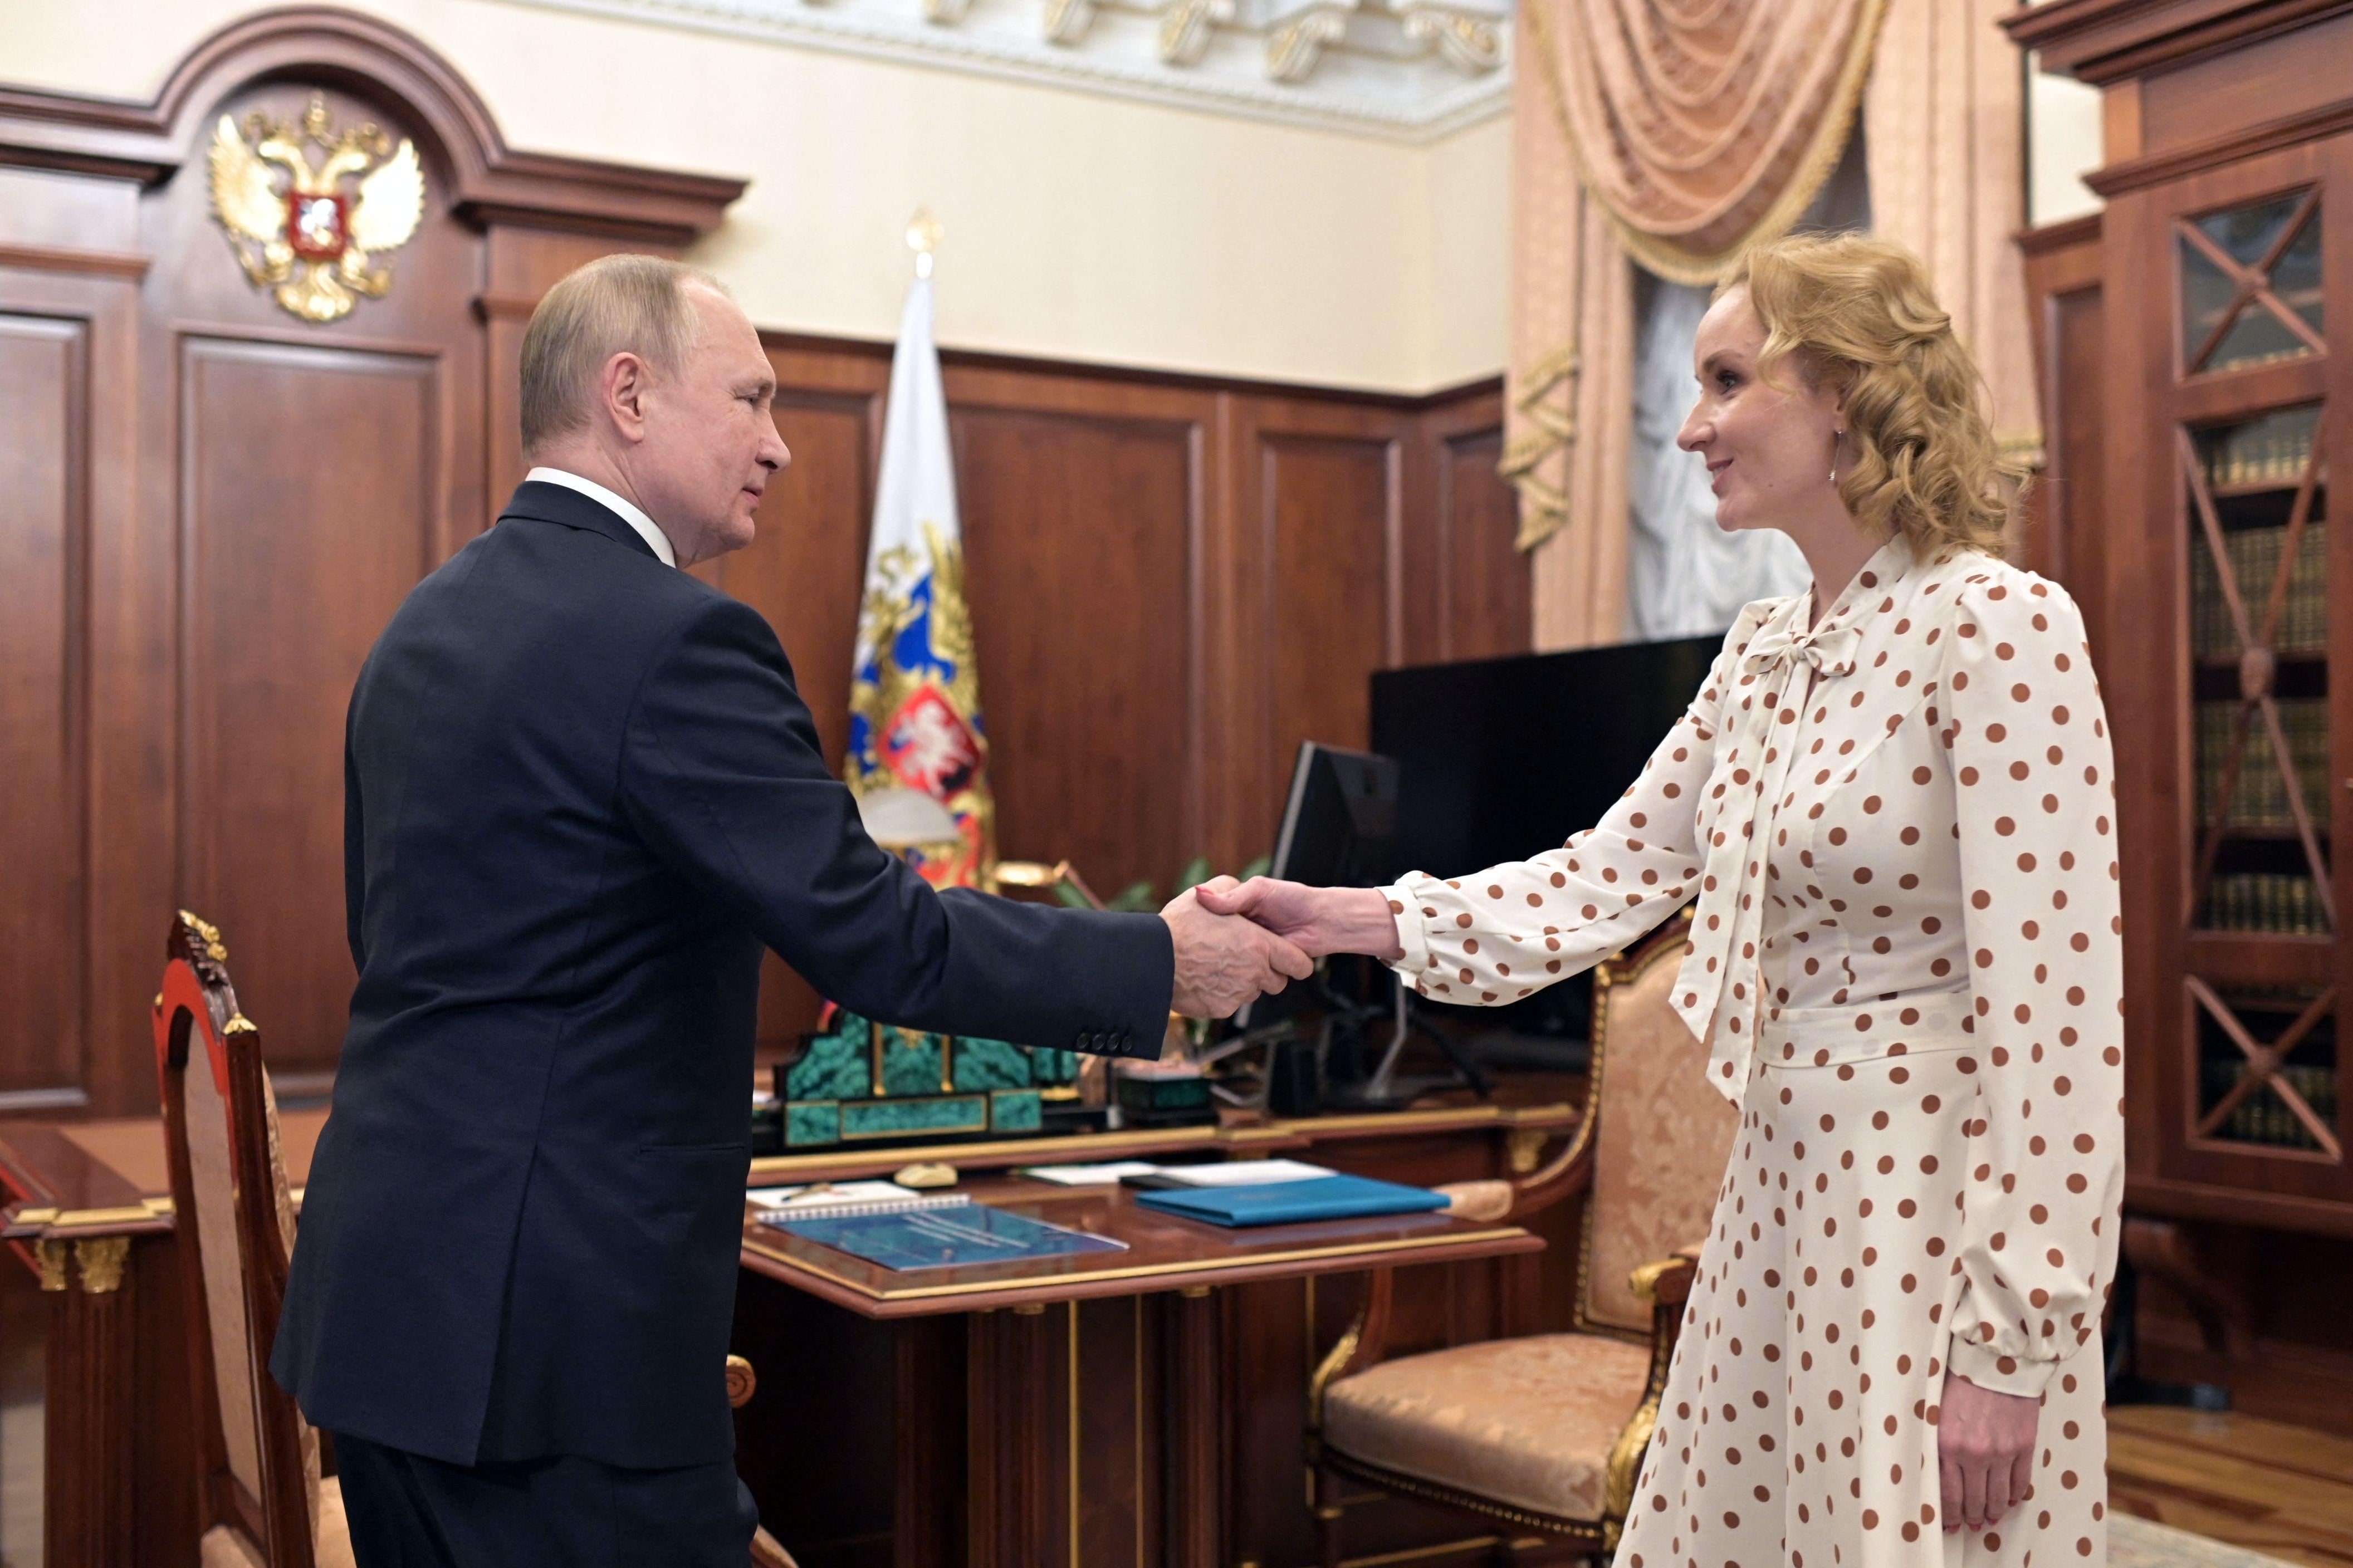 Putin stands far apart from a woman wearing a long dress in front of his desk but does reach out to shake her hand.